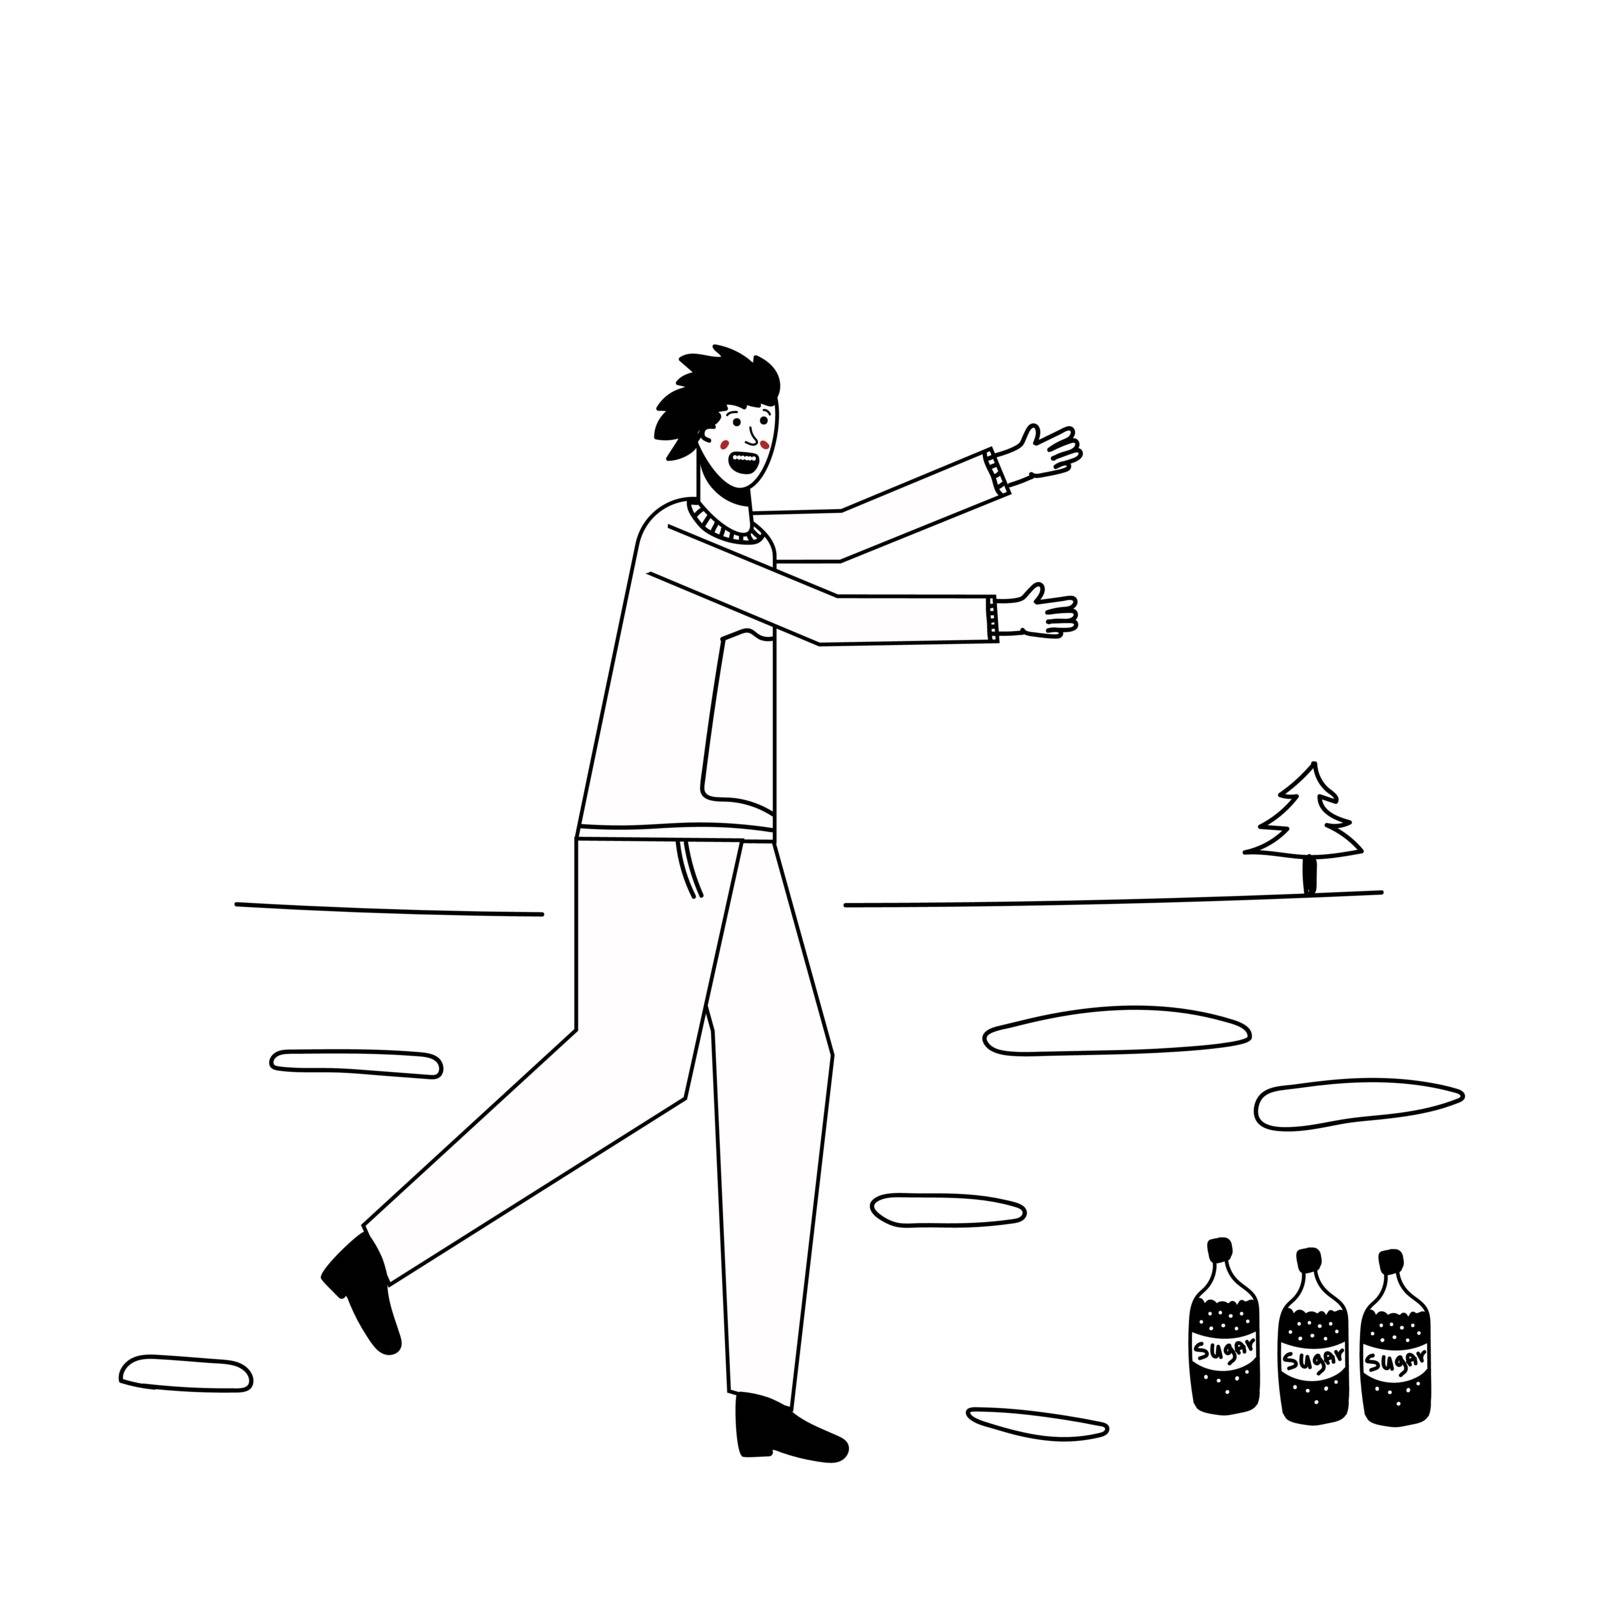 Soda addiction concept illustration. The man runs to the soda bottles. An unhealthy lifestyle, unhealthy diet, and a sweet tooth. Vector illustration. Lines. by zaryov